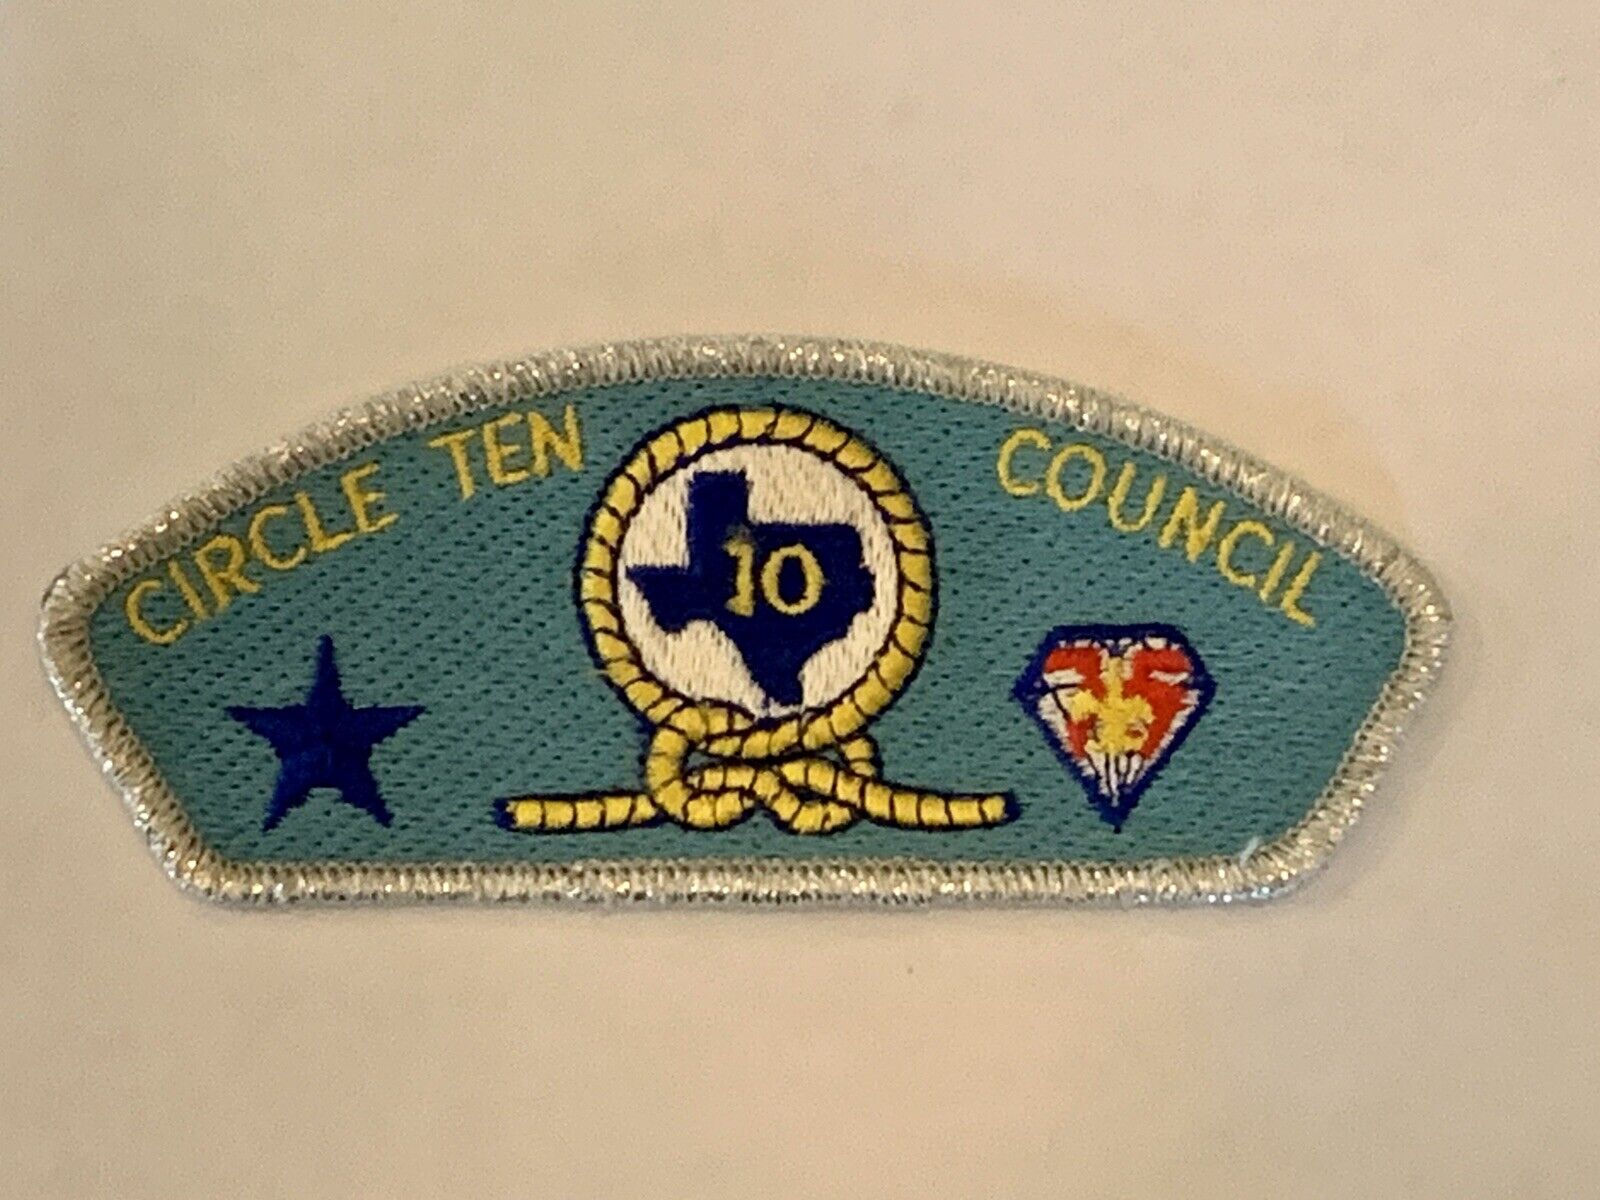 Circle Ten 10 CSP SA-9 Error Patch/Yel Letters - 1 of 107 - Book Value $600-$650